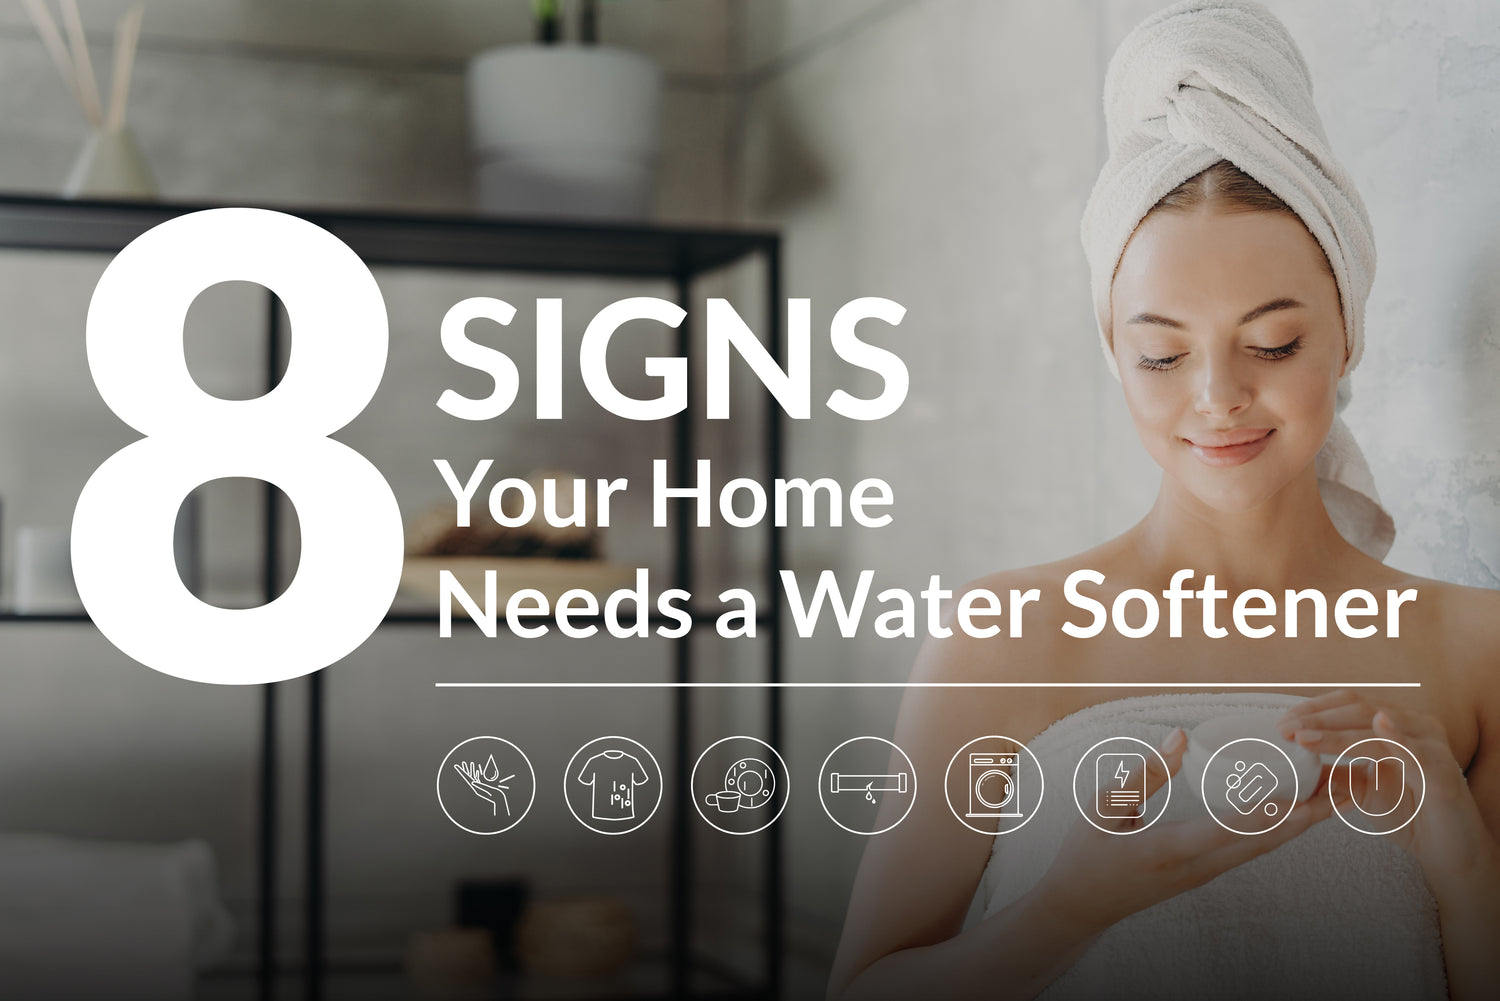 8 Signs Your Home Needs a Water Softener